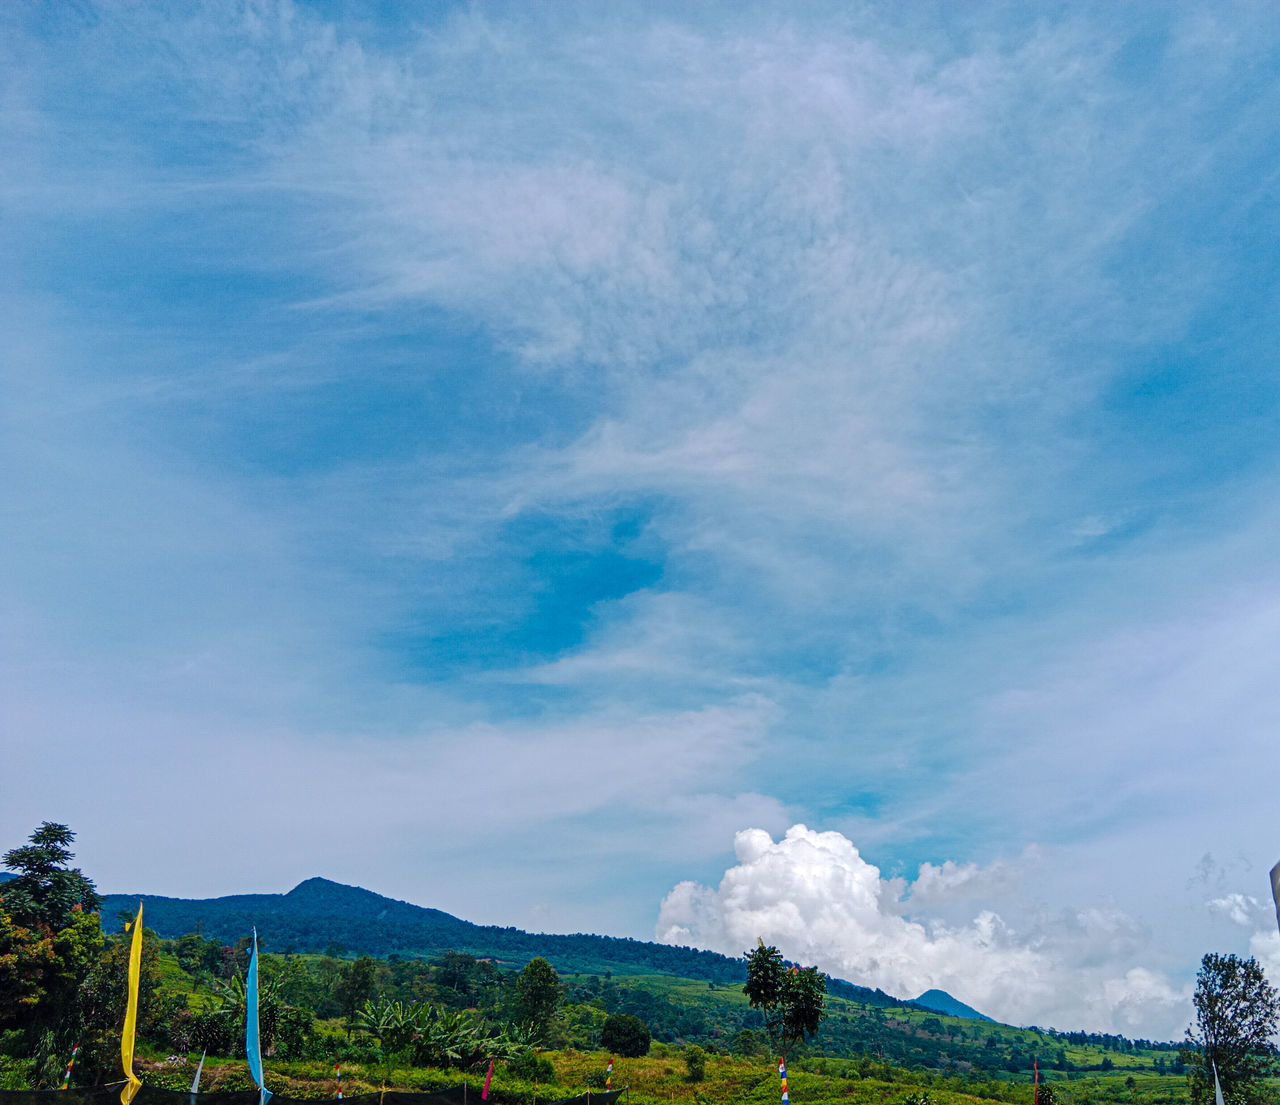 sky, cloud, environment, landscape, mountain, horizon, nature, scenics - nature, beauty in nature, blue, plant, land, mountain range, tree, travel, no people, travel destinations, tranquility, outdoors, grass, tranquil scene, tourism, non-urban scene, rural area, rural scene, day, field, meadow, sunlight, green